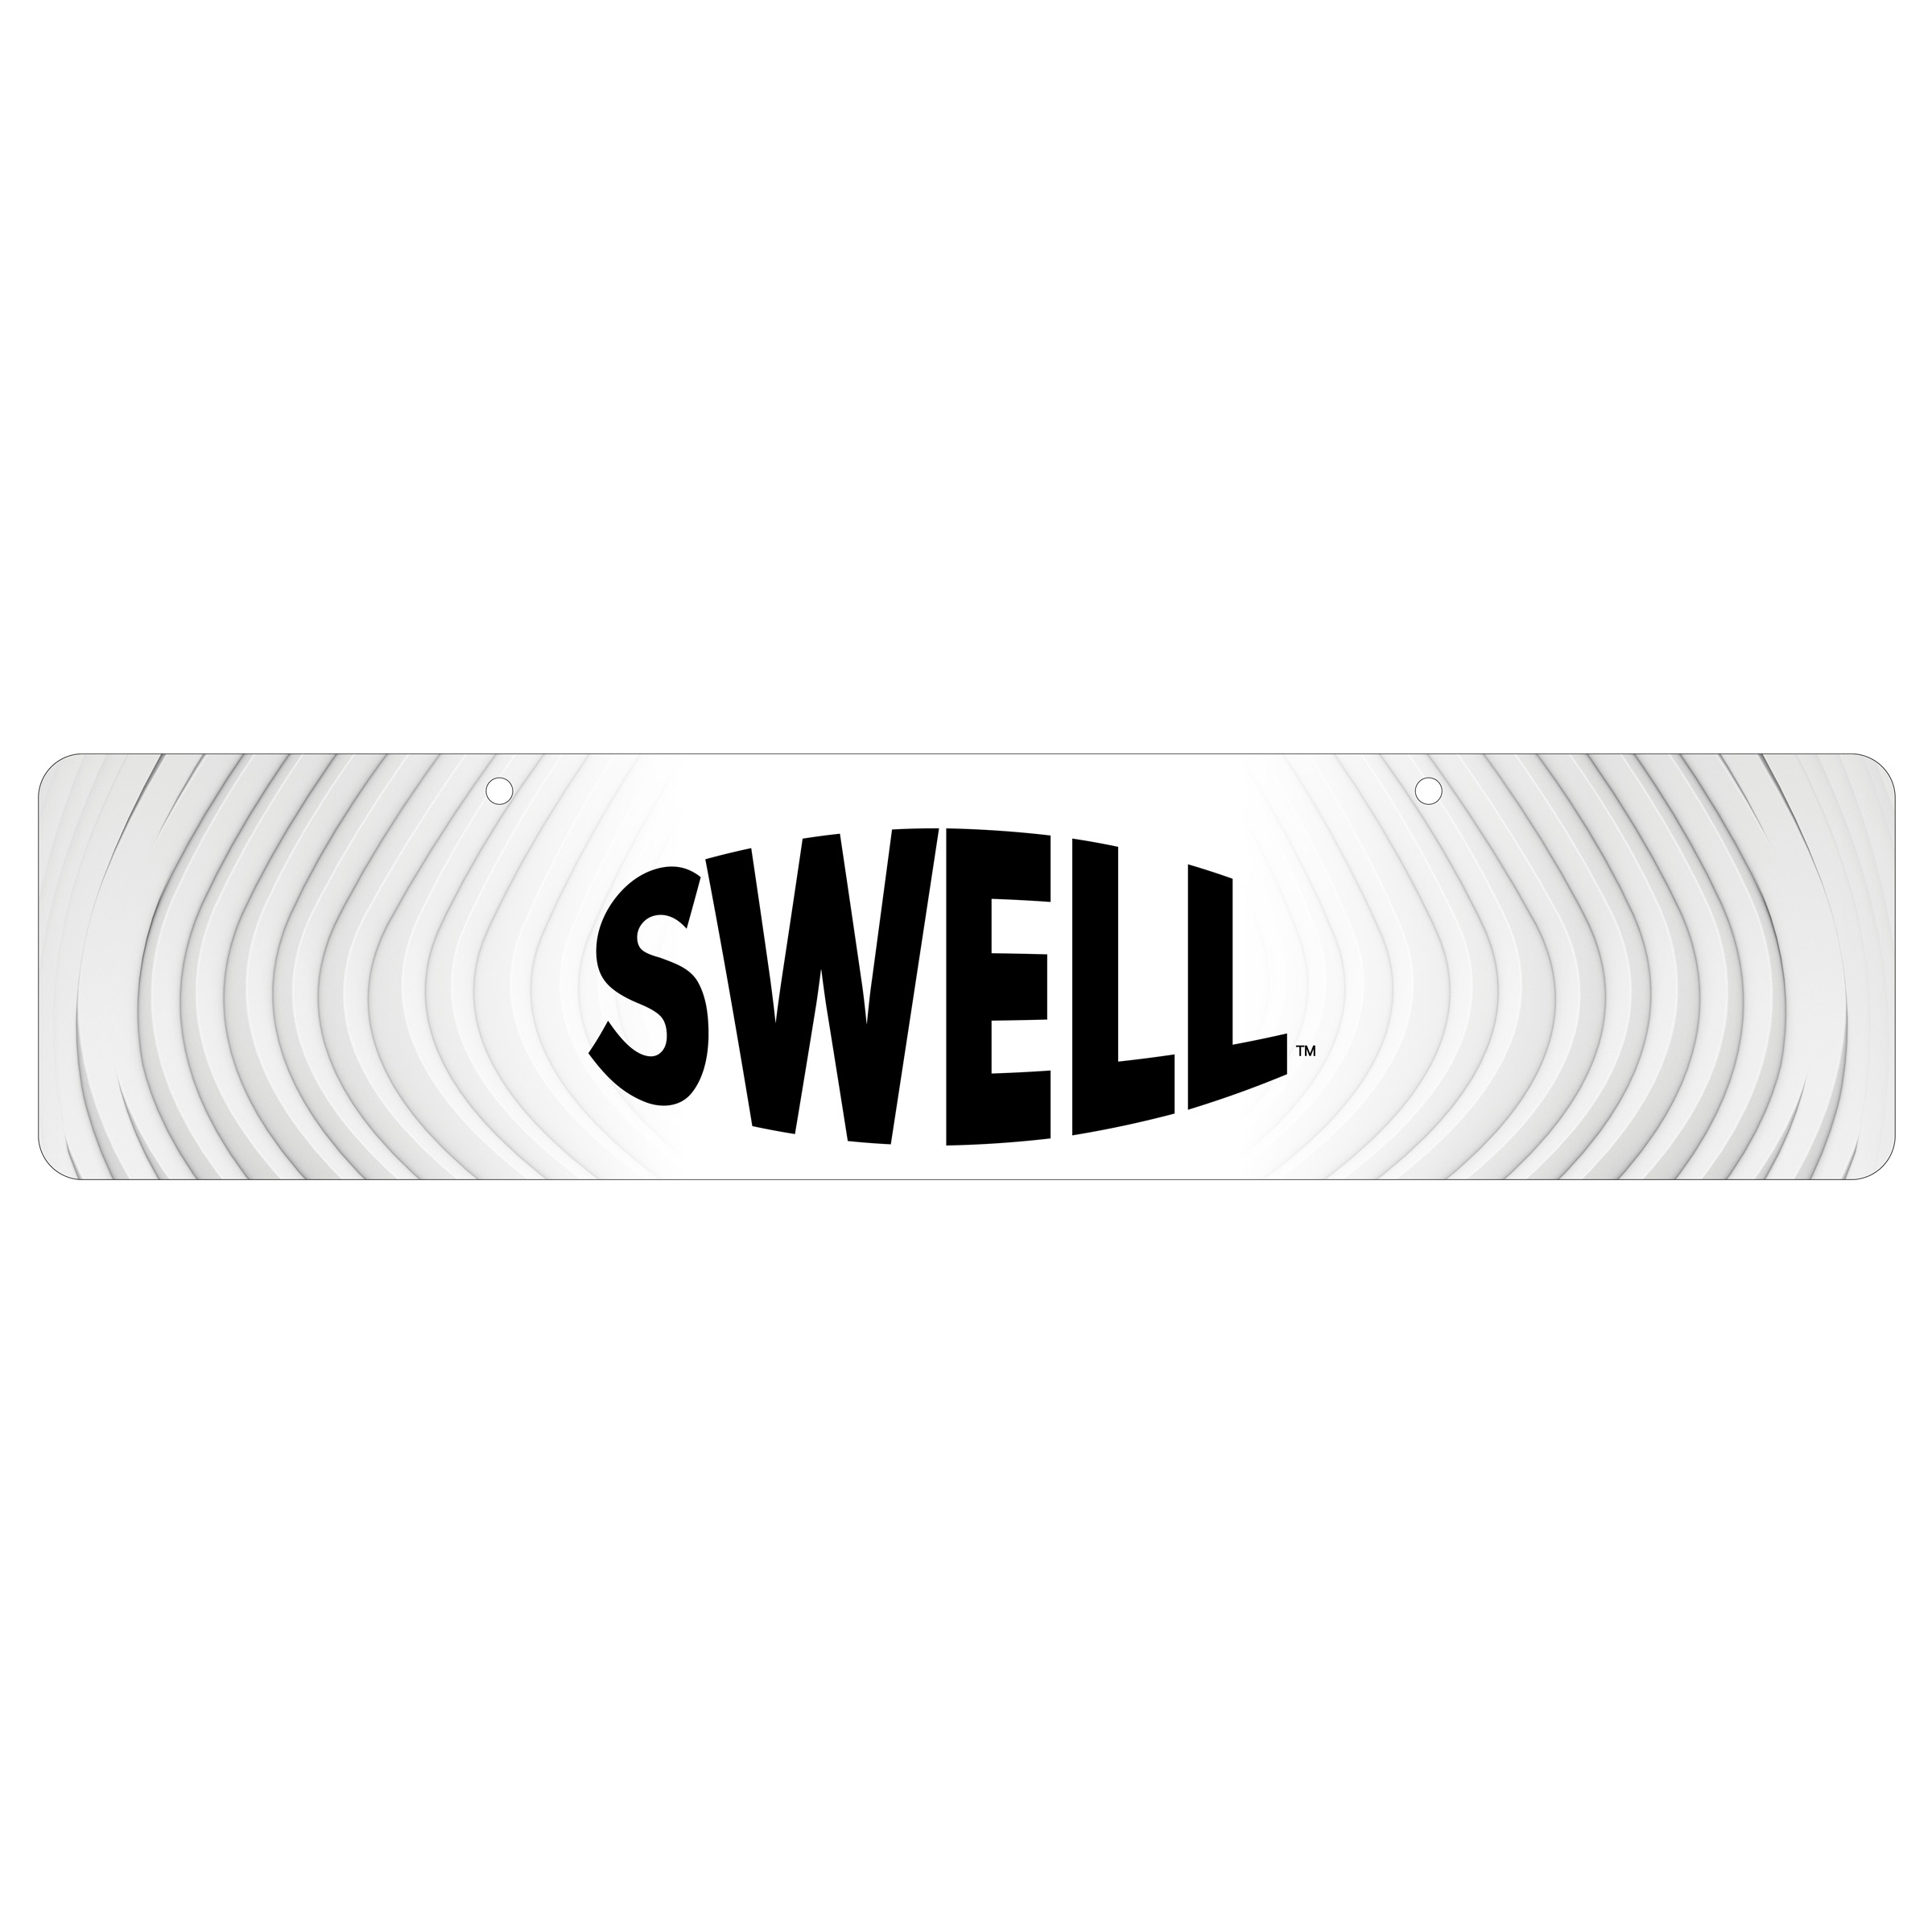 Cap off your Swell display with an attractive and functional planogram banner. Printed on heavy cardstock